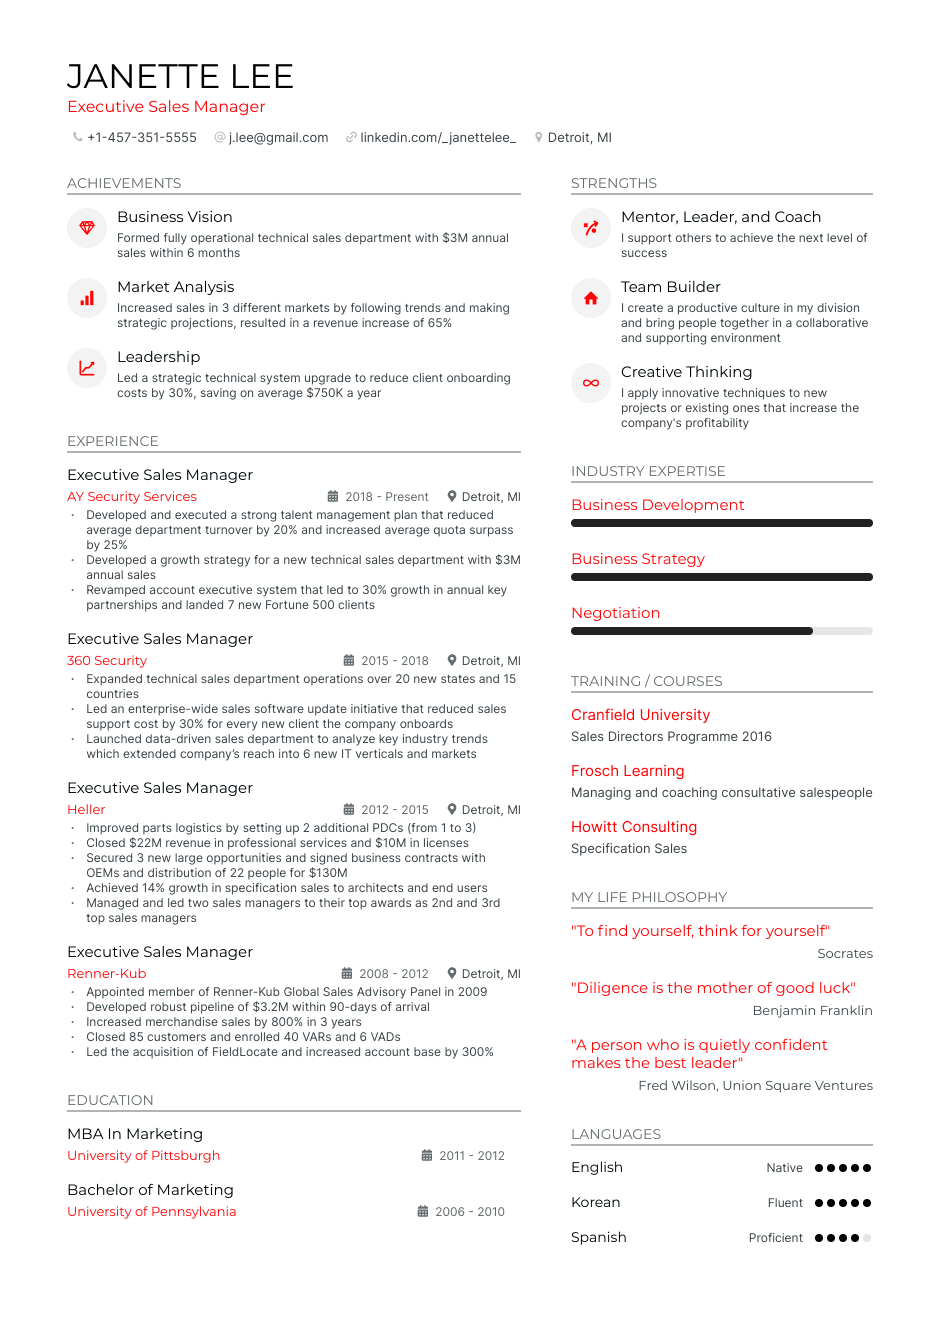 Executive sales manager resume